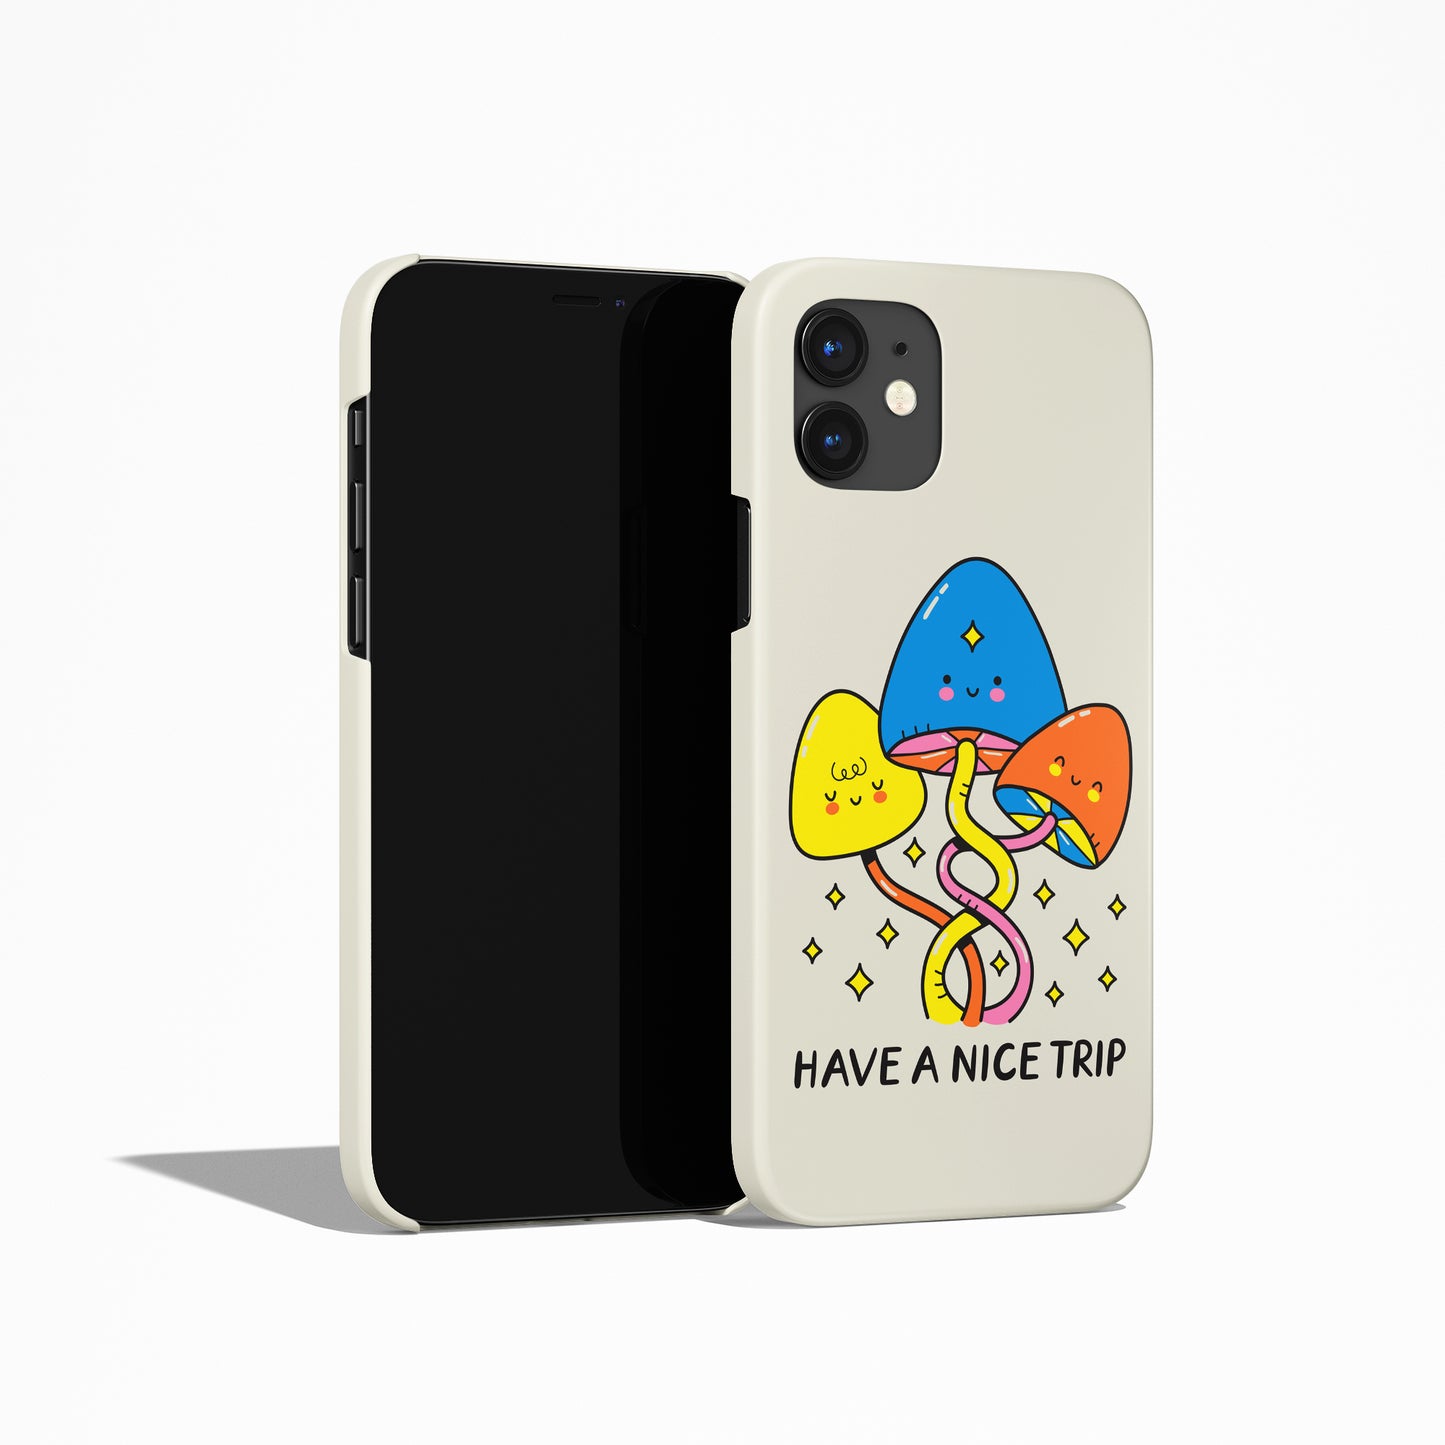 Have a nice trip iPhone Case